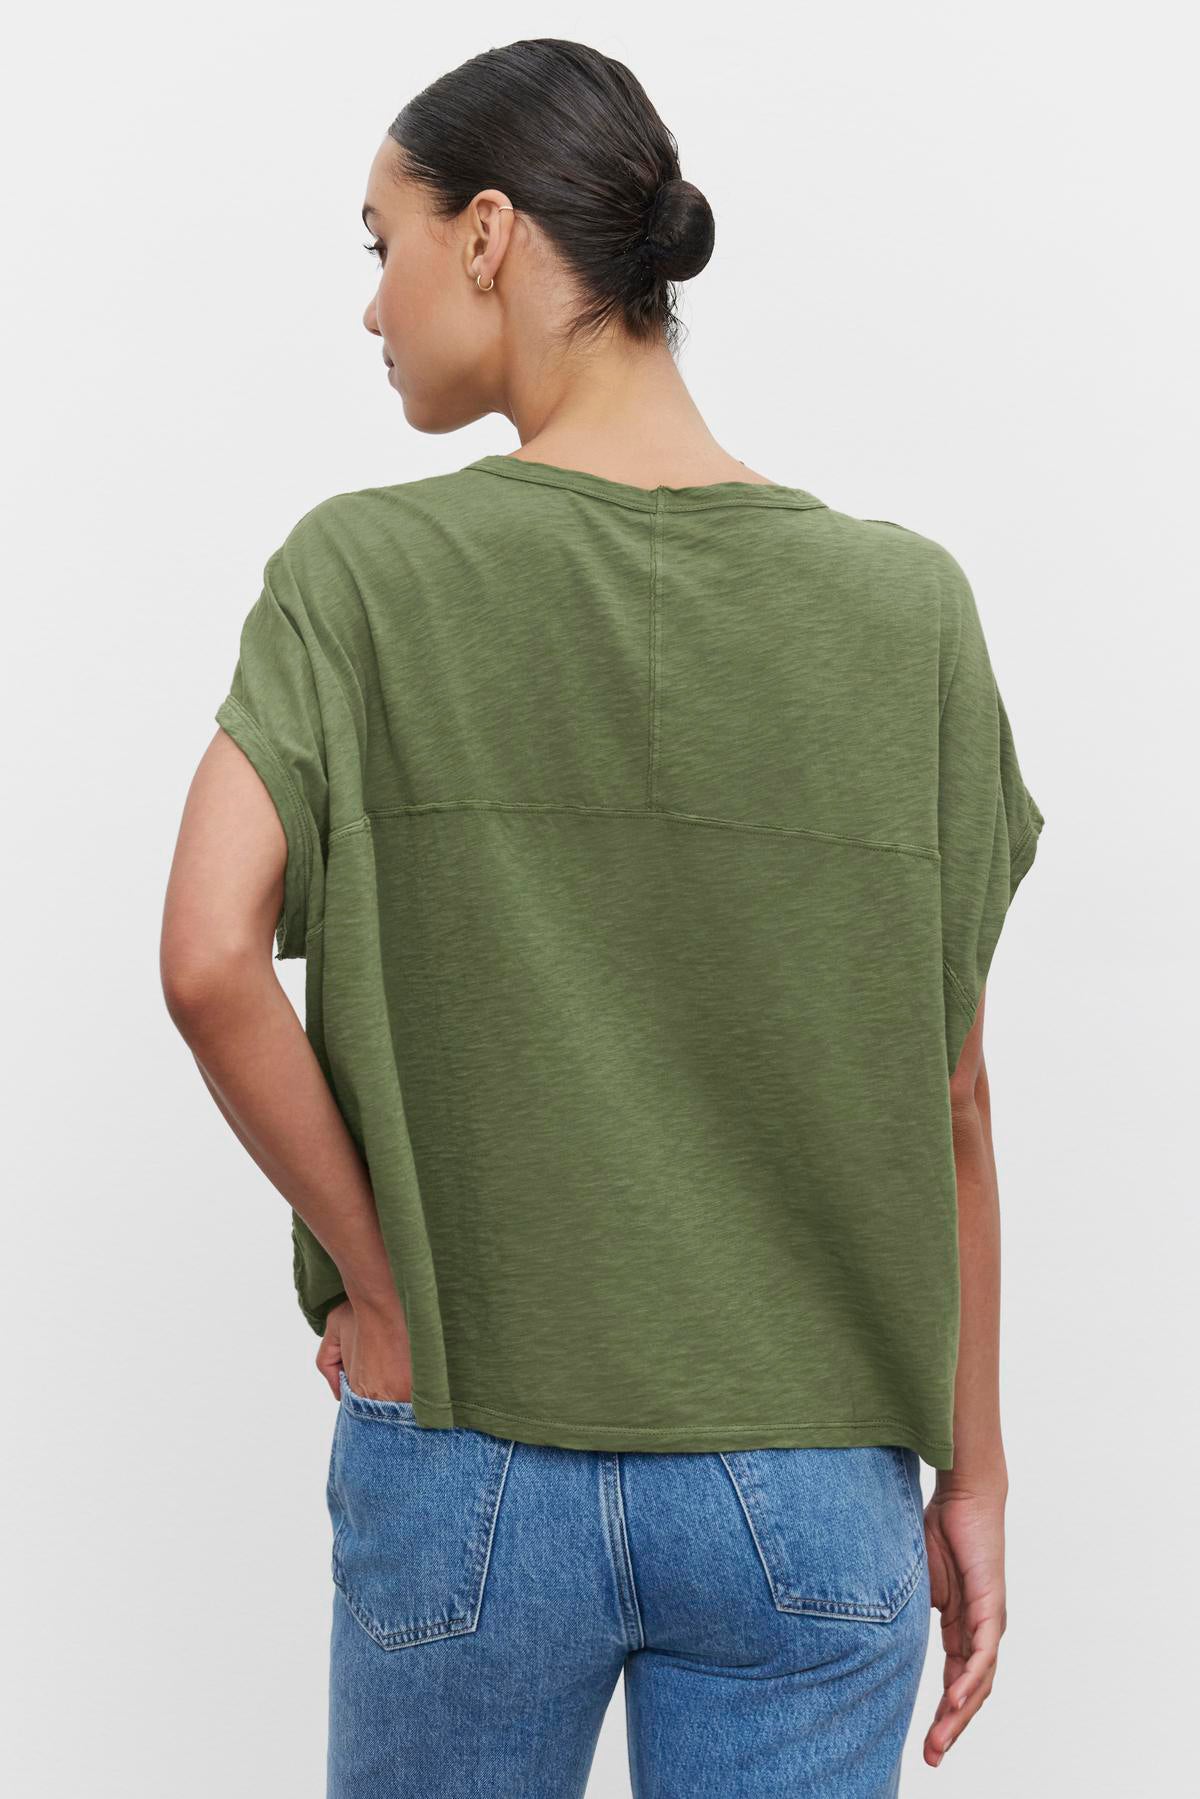 Woman from behind wearing a green Caroline Cocoon Top by Velvet by Graham & Spencer and blue jeans, standing with her left hand on her hip.-36532940603585